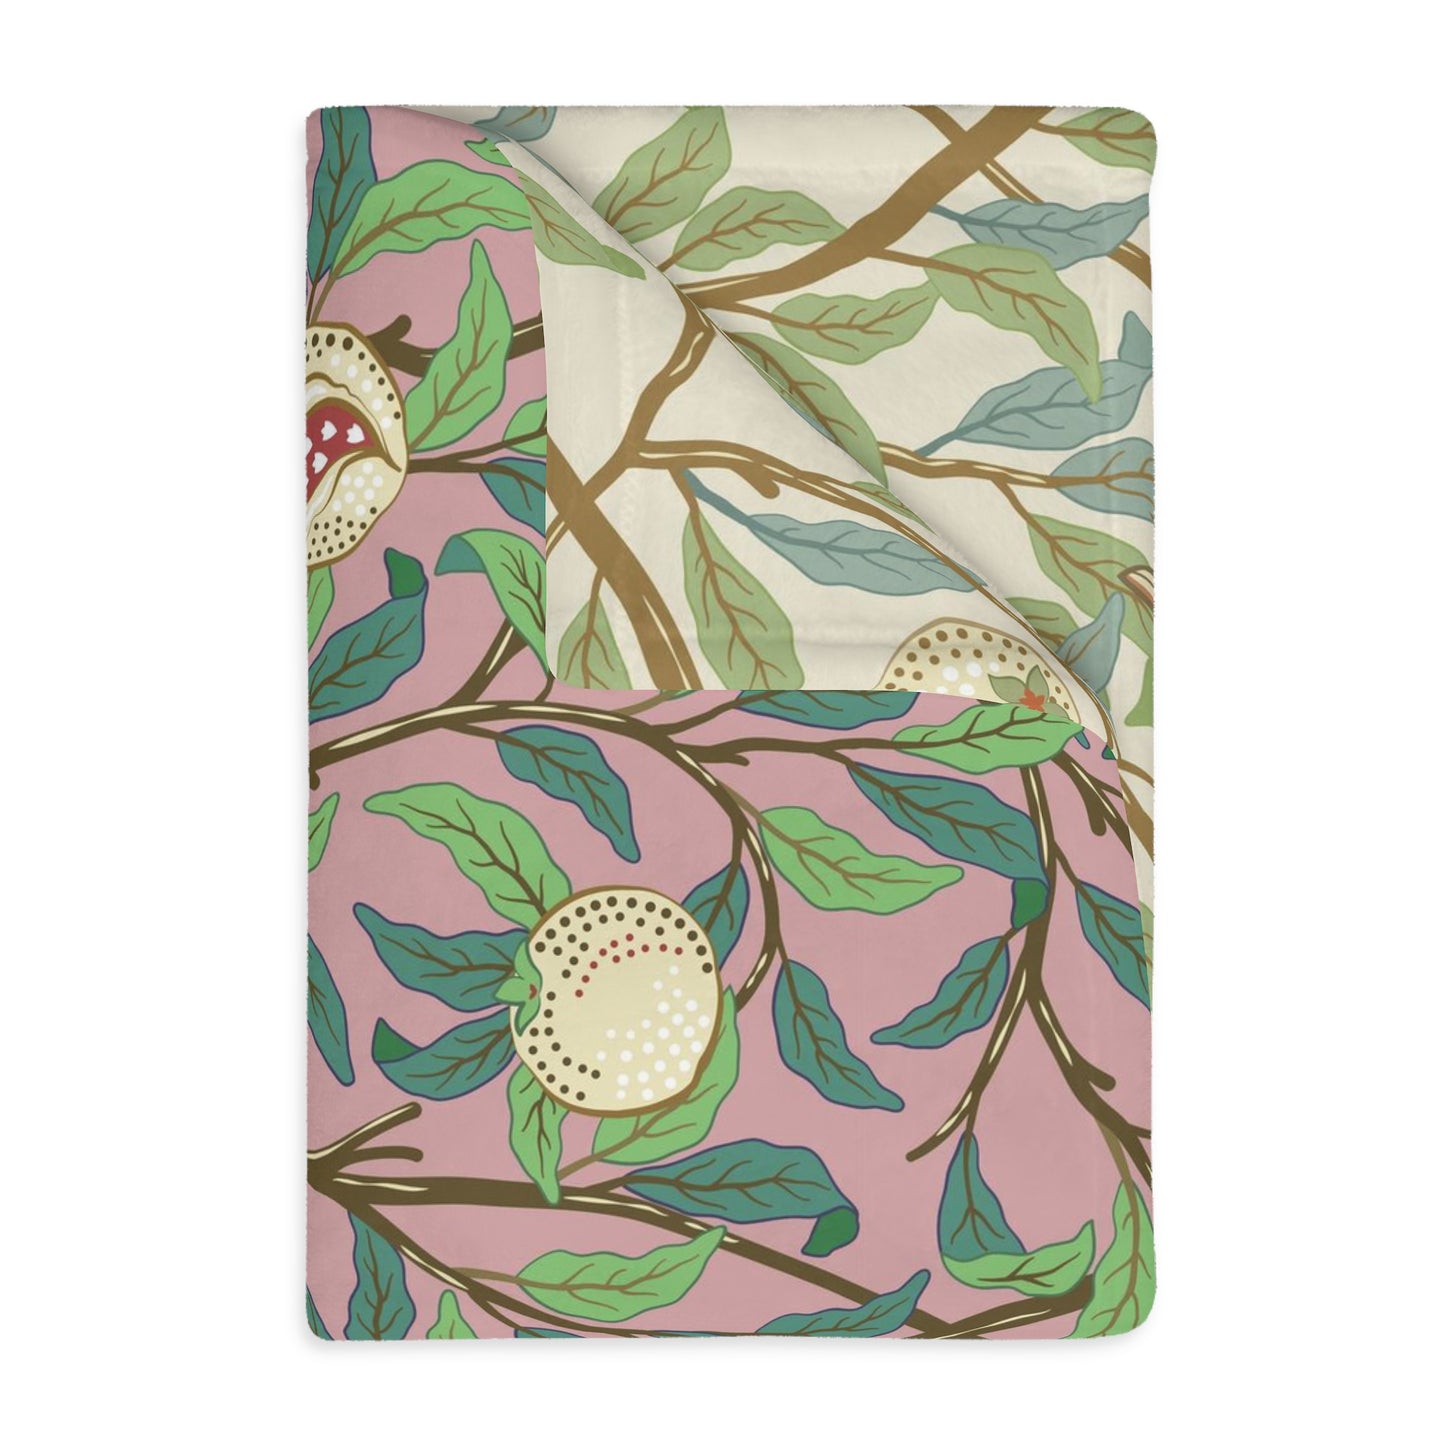 william-morris-co-luxury-velveteen-minky-blanket-two-sided-print-bird-and-pomegranate-collection-rosella-parchment-4